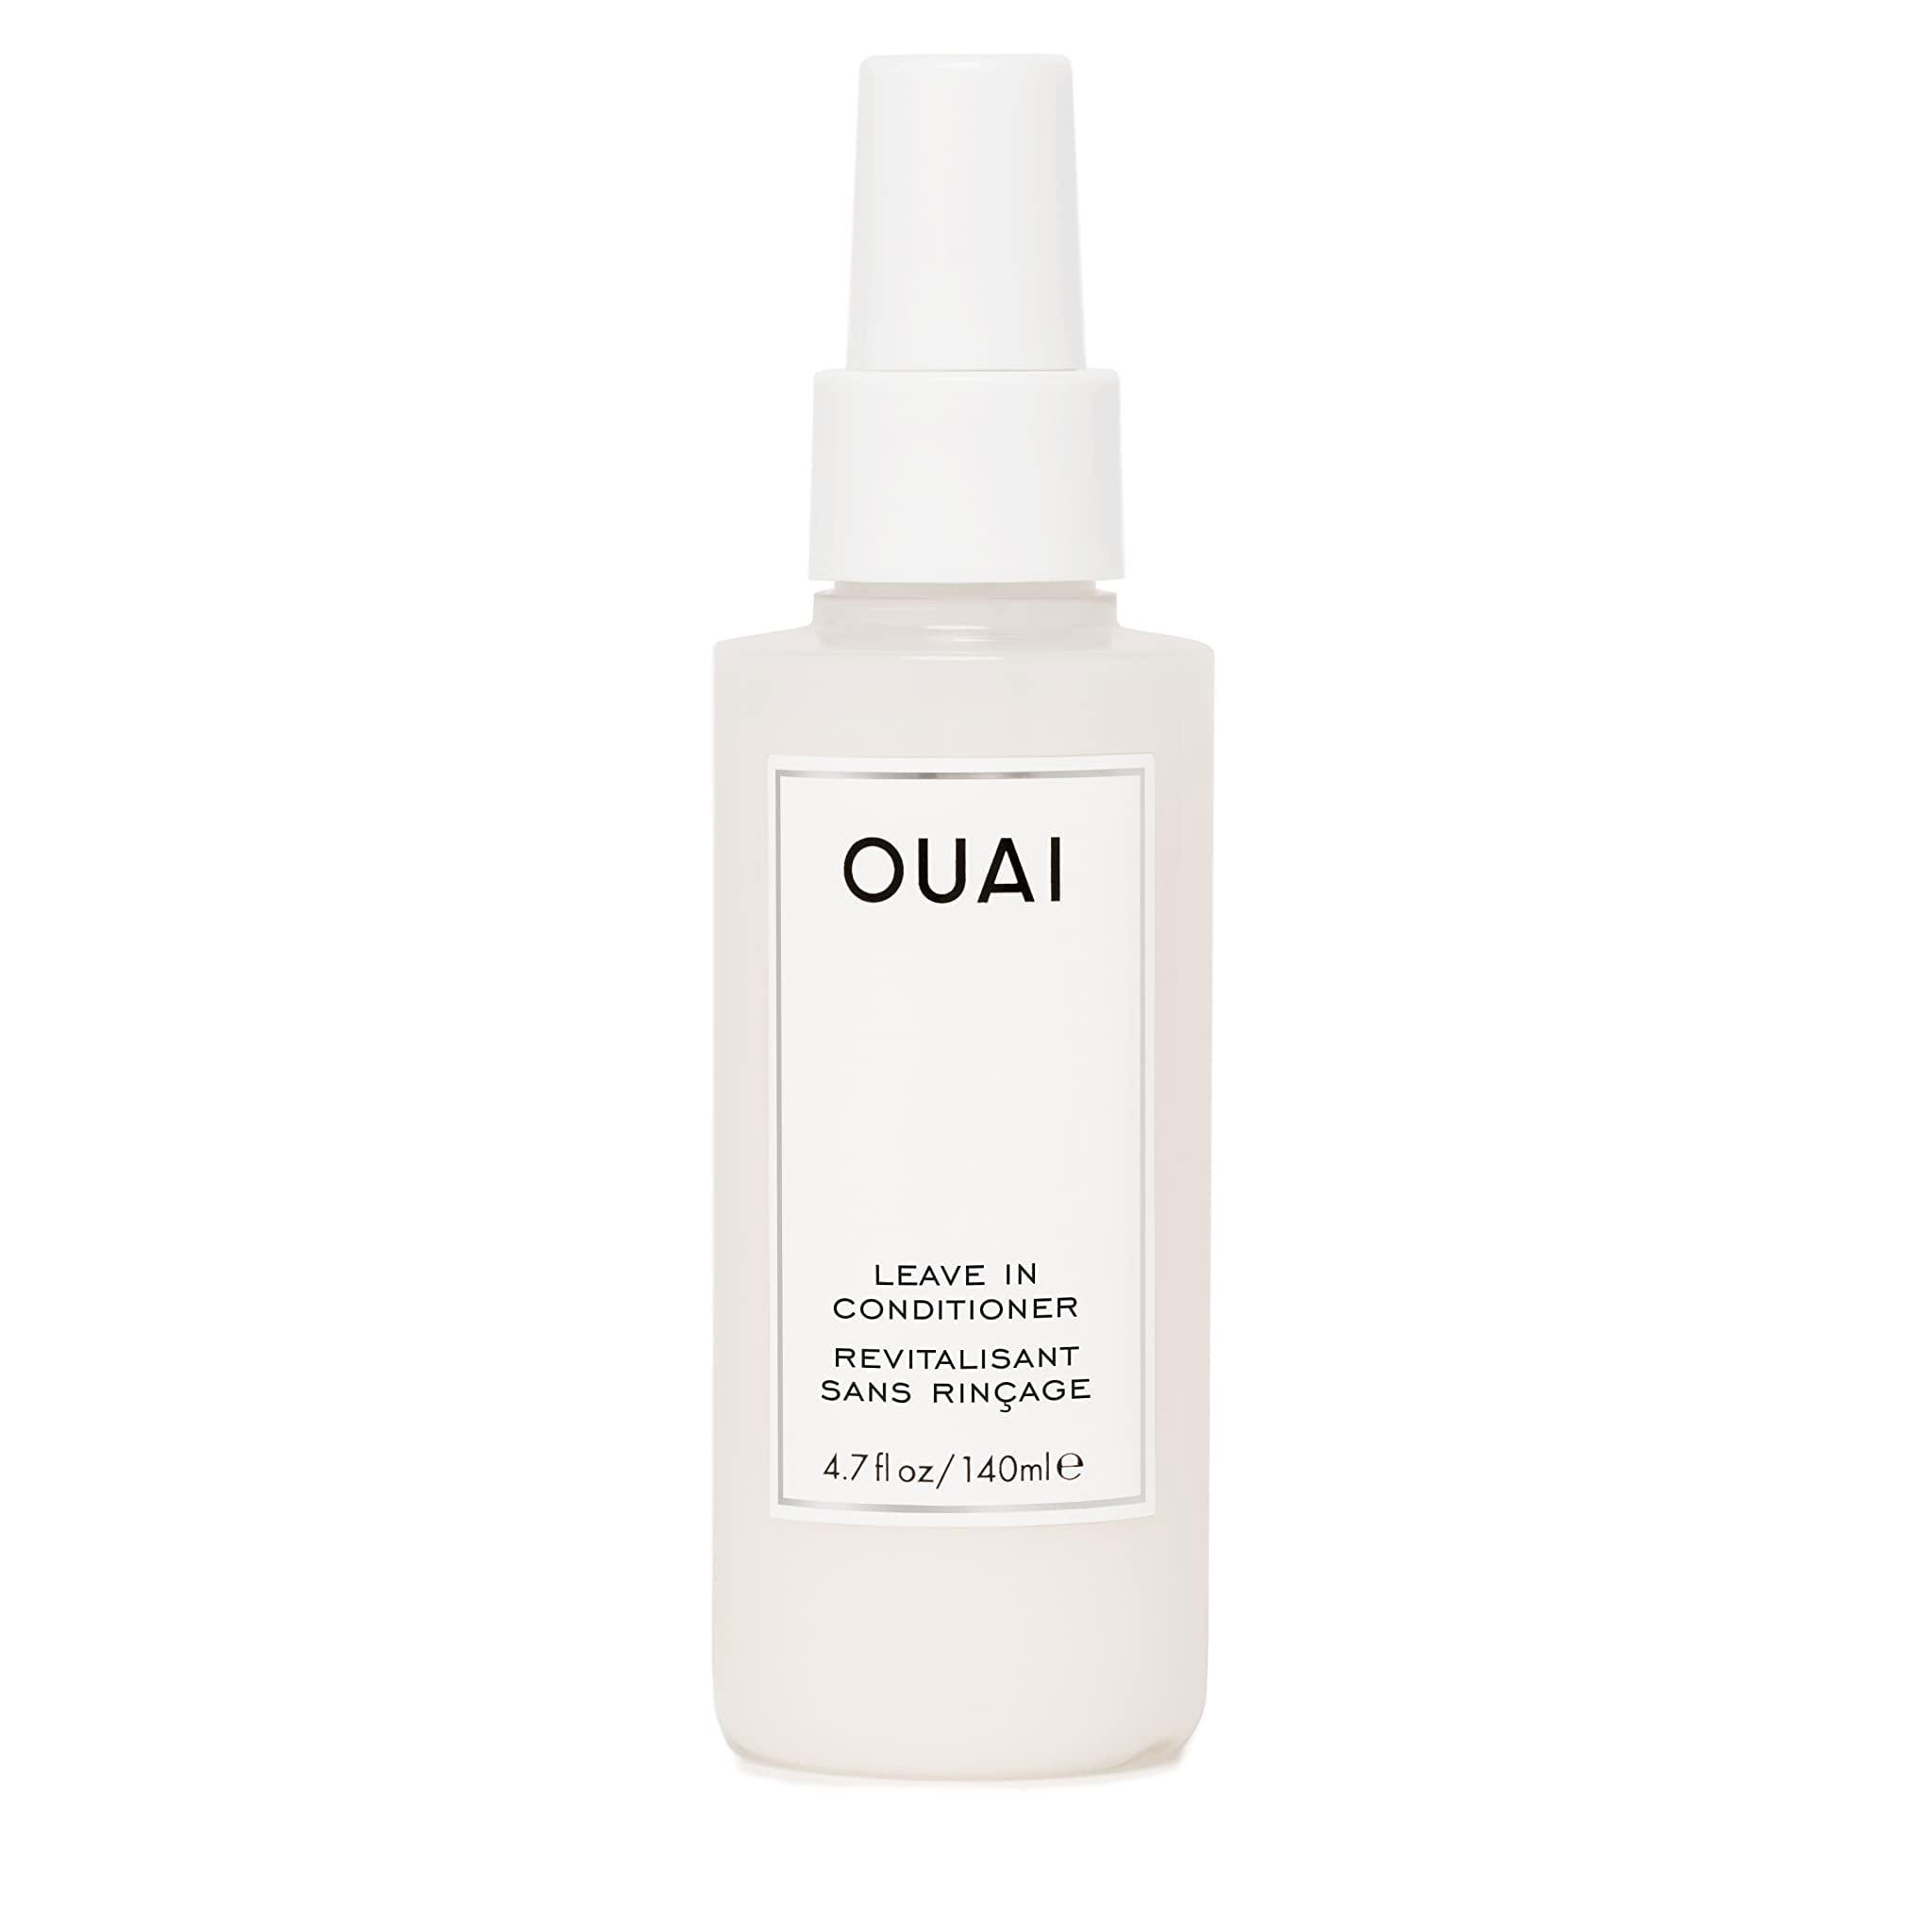 OUAI Leave-In Conditioner - Multitasking Mist that Protects Against Heat, Primes Hair for Style, Smooths Flyaways, Adds Shine & Detangles - Free of Parabens, Sulfates & Phthalates - 4.7 fl oz